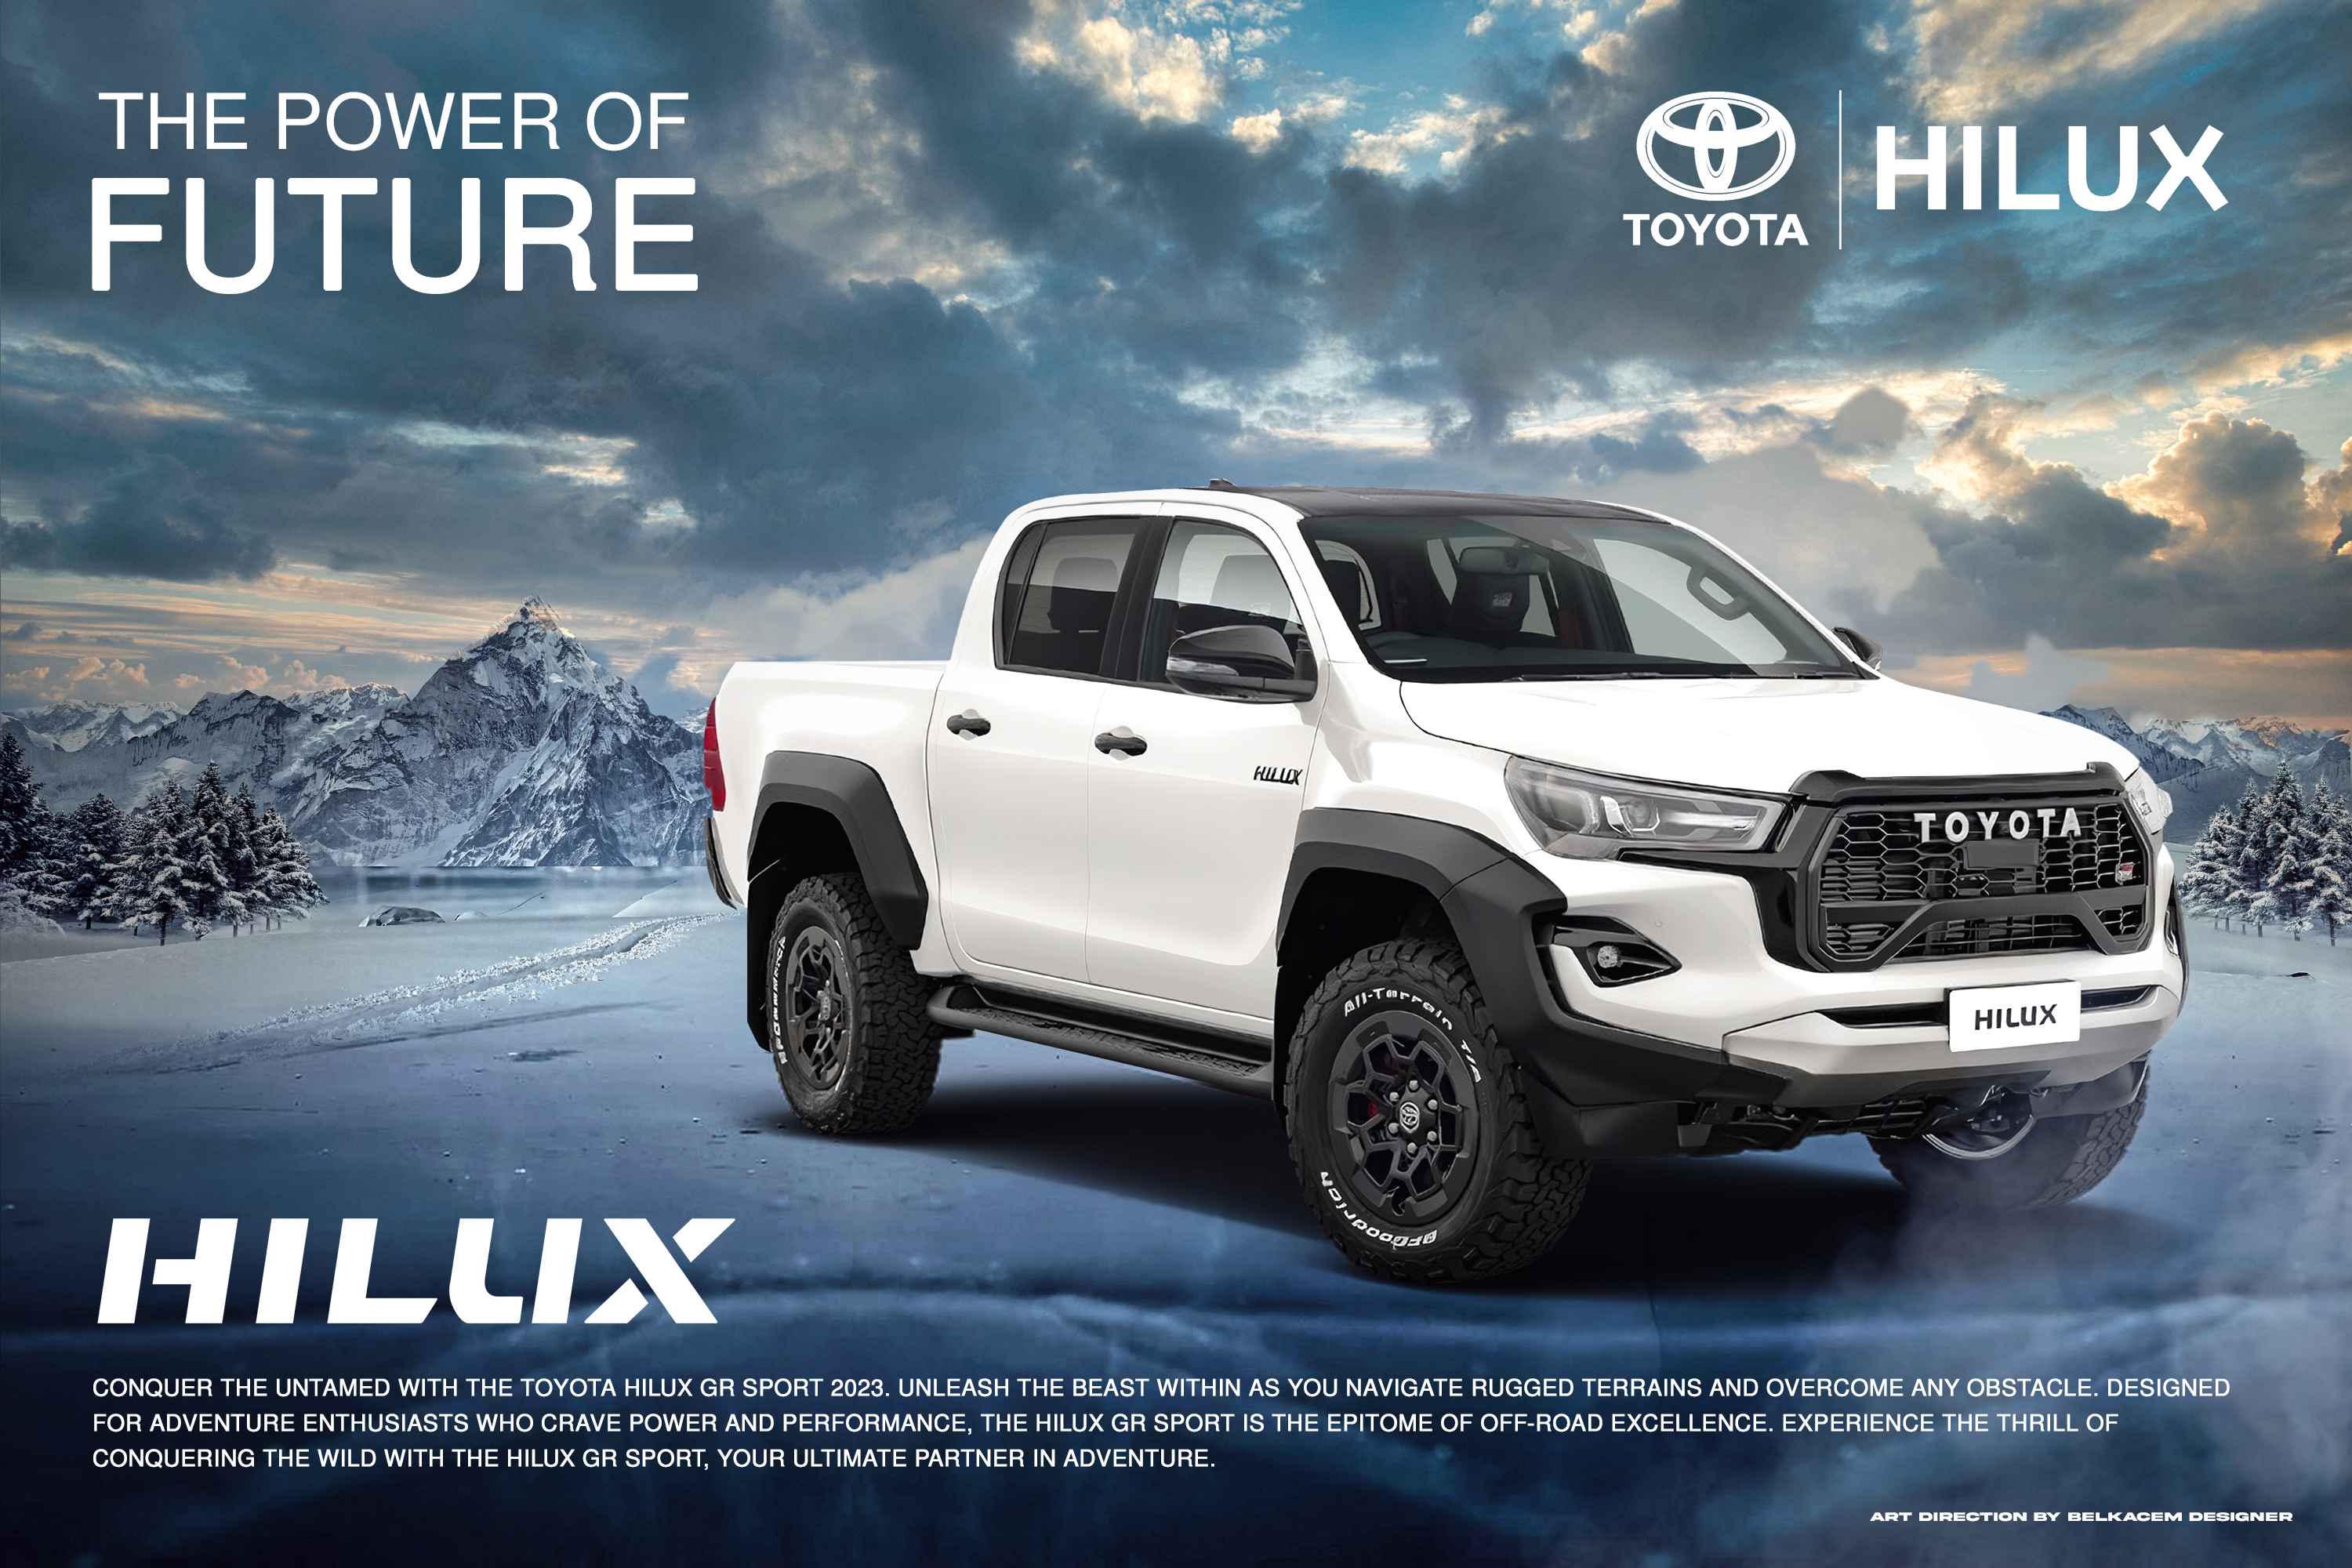 Toyota: TOYOTA HILUX GR SPORT ADVERTISING, 2023 • Ads of the World™